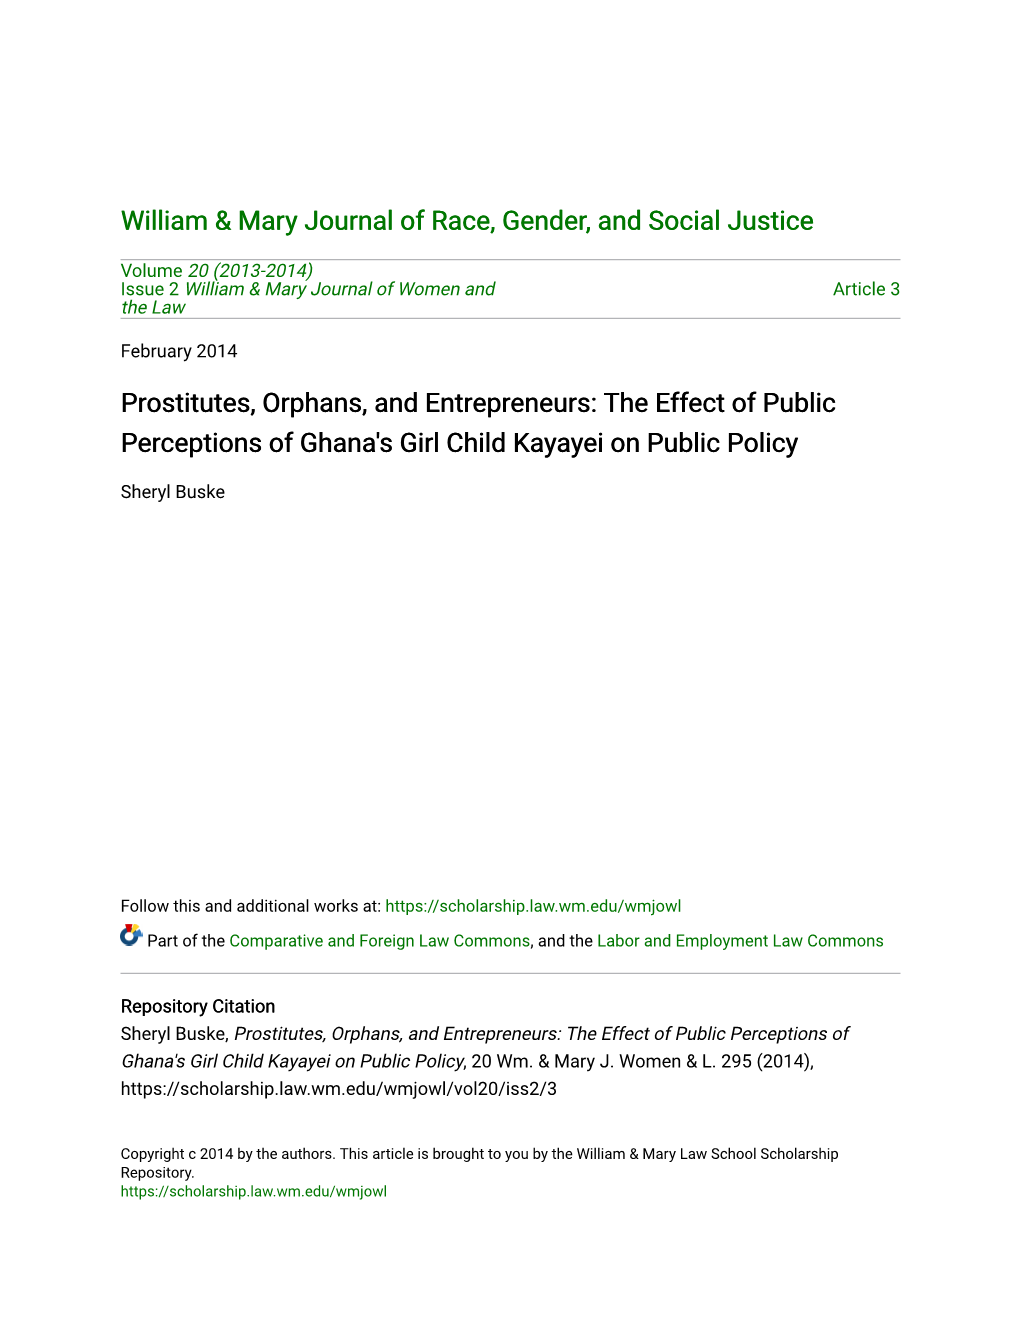 The Effect of Public Perceptions of Ghana's Girl Child Kayayei on Public Policy